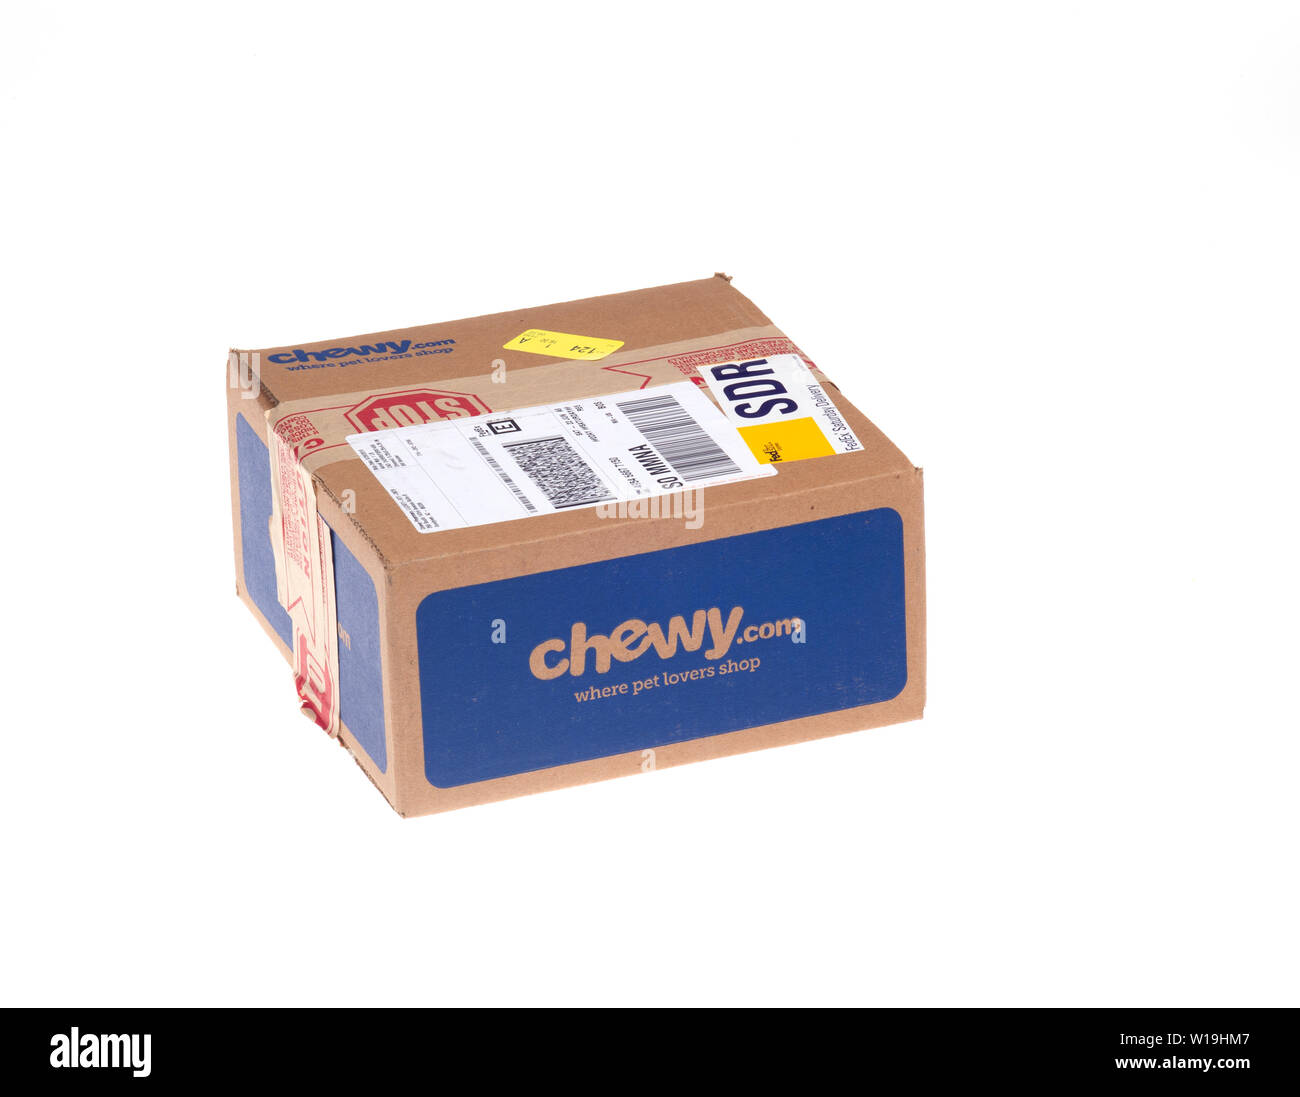 Chewy pet supplies box delivered via FedEx Home delivery on white background Stock Photo